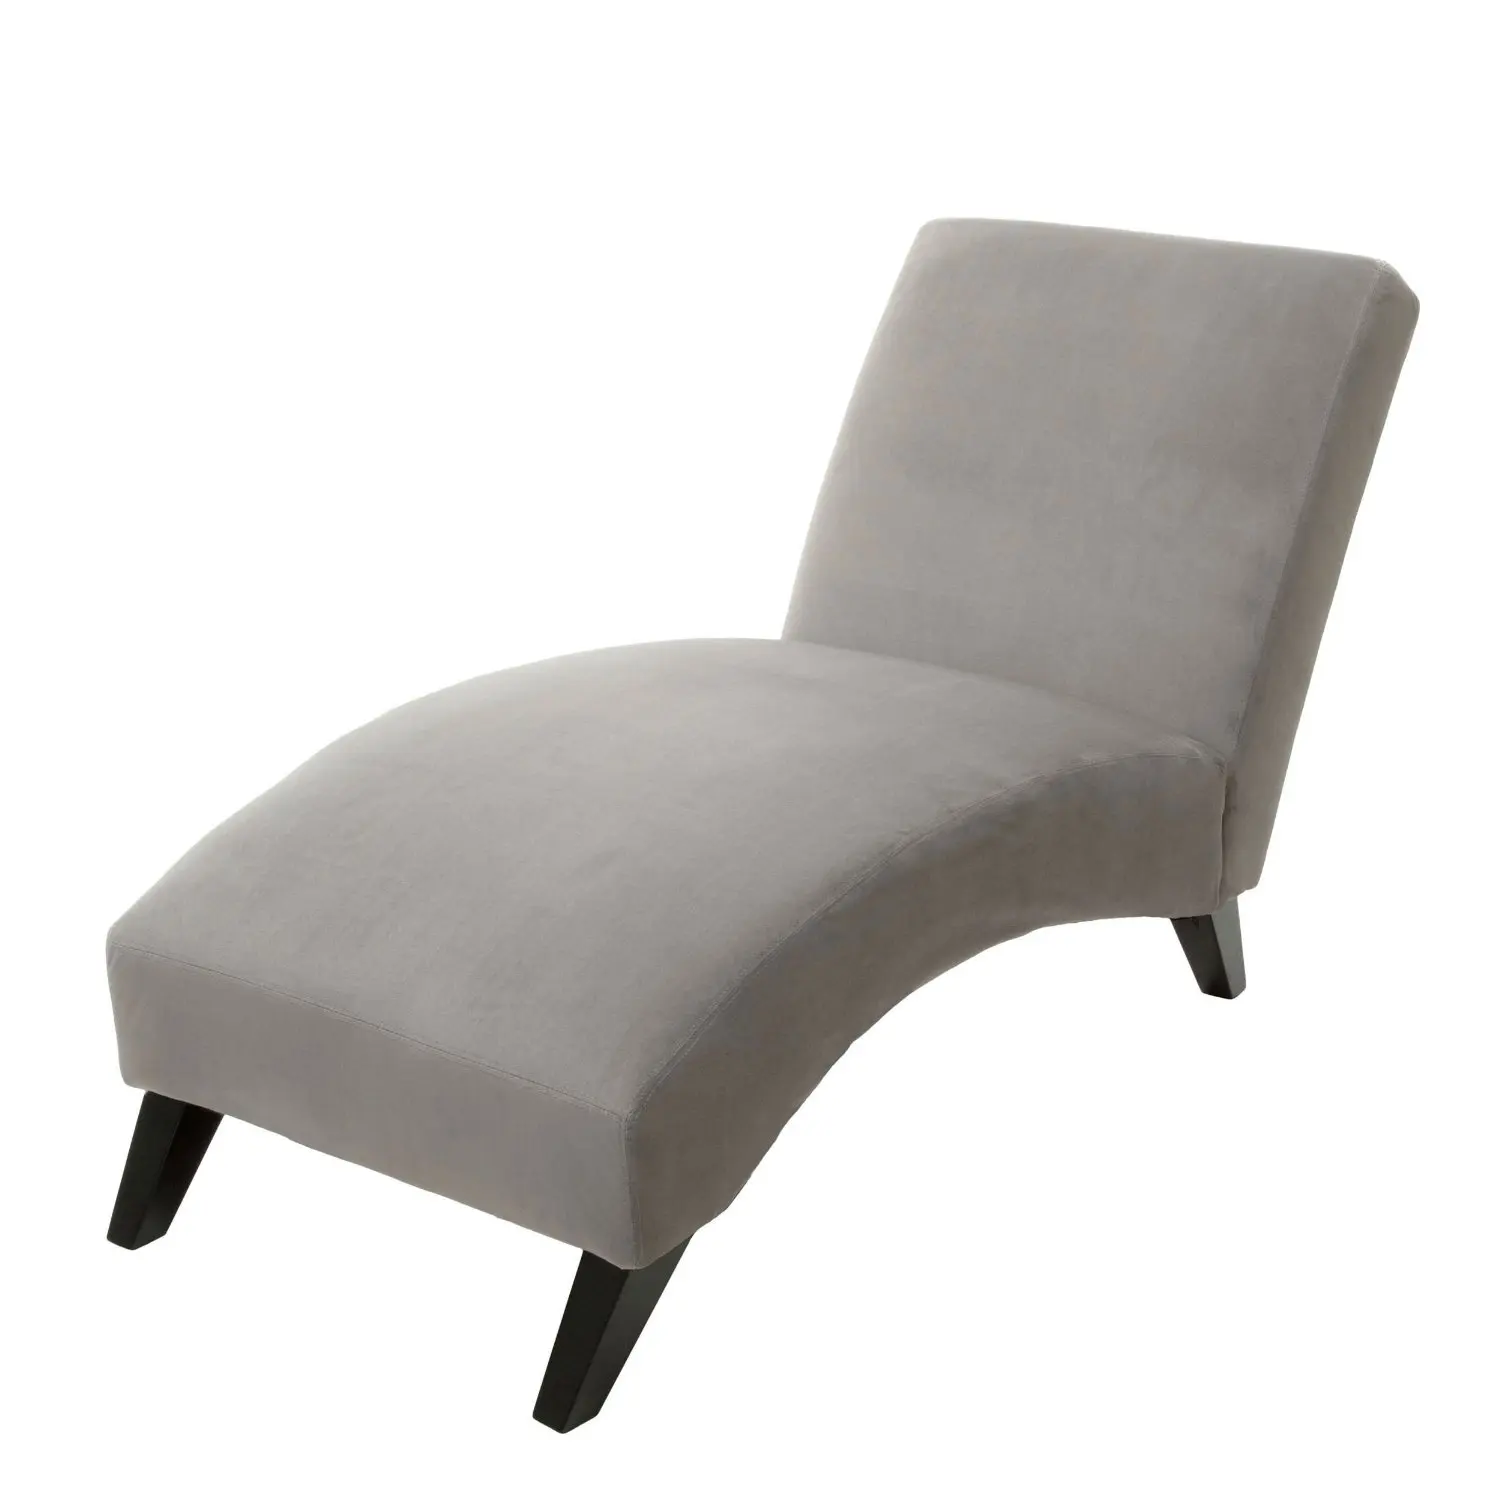 Buy This Grey Chaise Lounge Chair Features A Curved Back A Modern